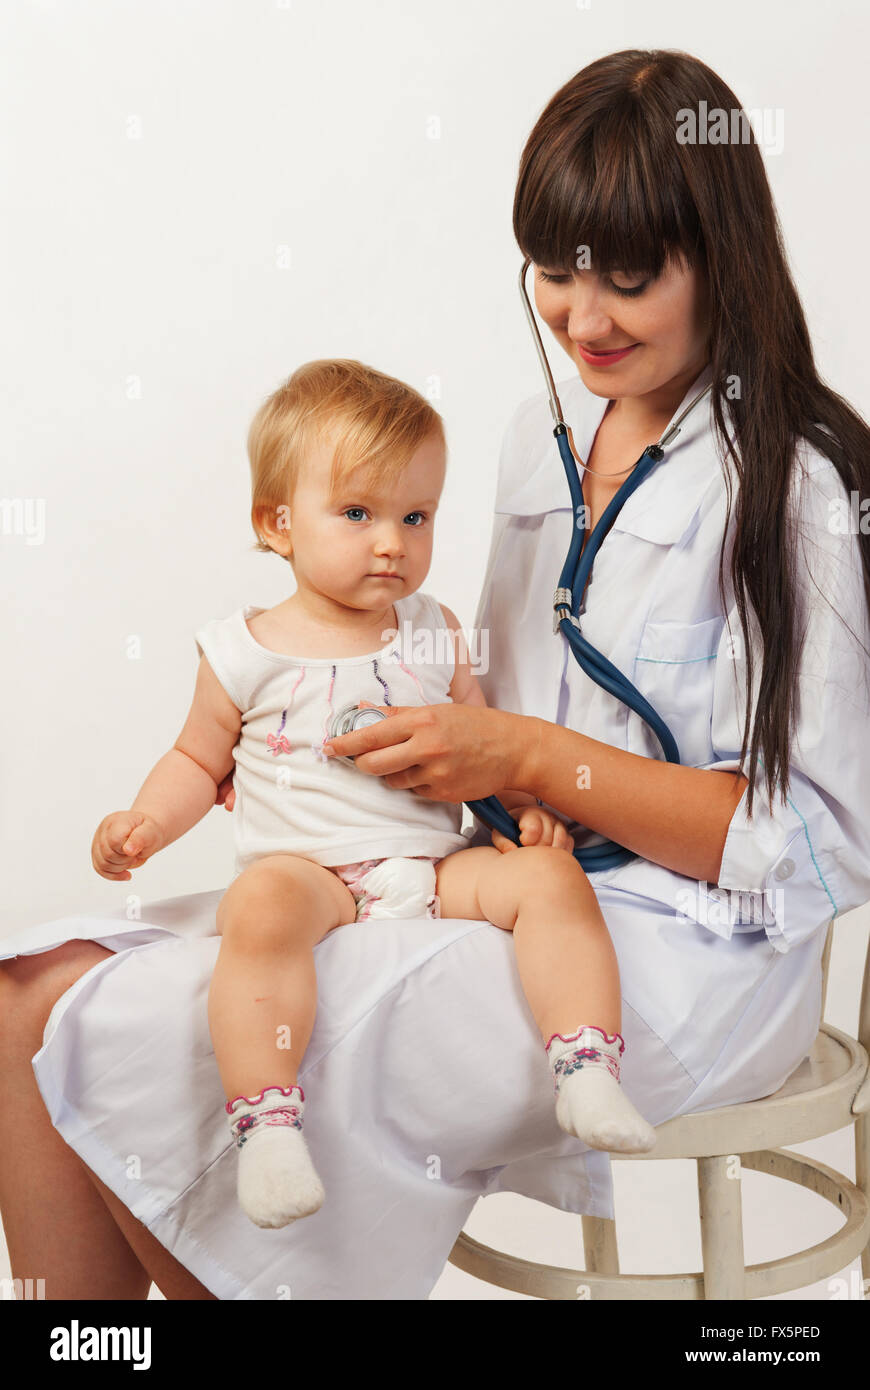 Pediatrician woman doctor with baby girl patient on light background Stock Photo